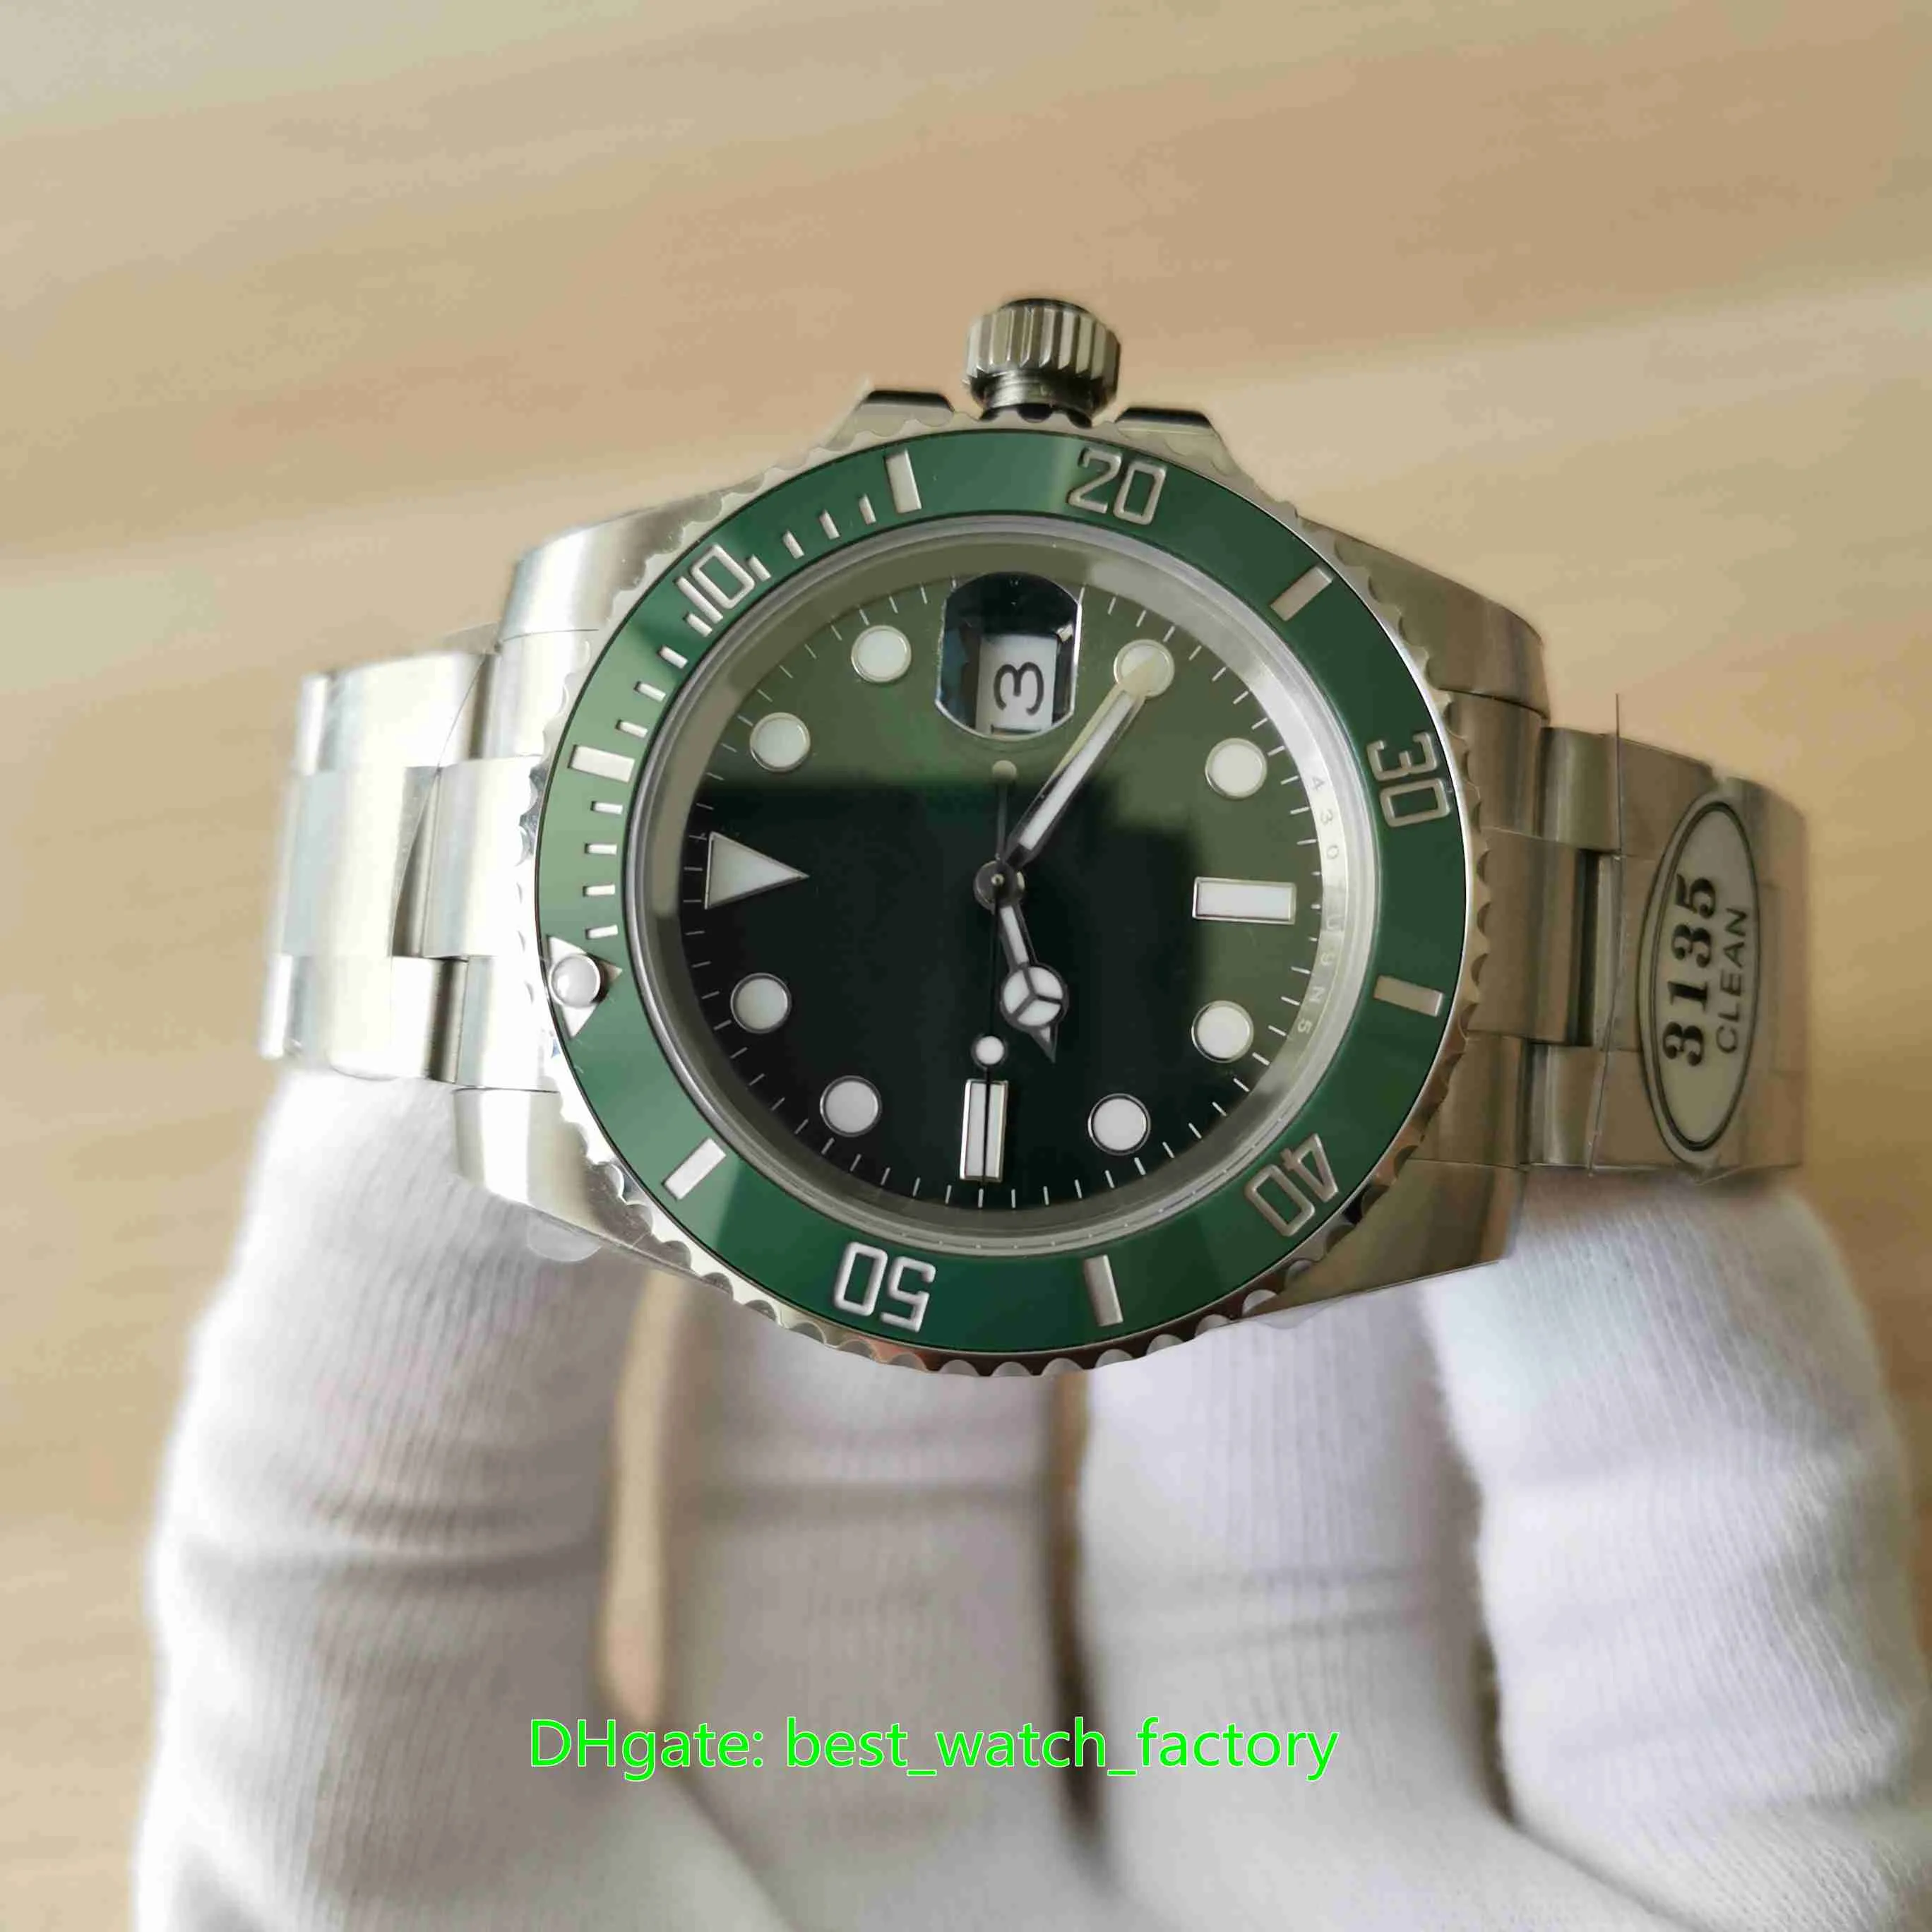 CLEAN Factory Perfect Version Watches 40mm x 12mm 116610 116610LV-97200 Ceramic 904 Steel CAL 3135 Movement Mechanical Automatic M263e